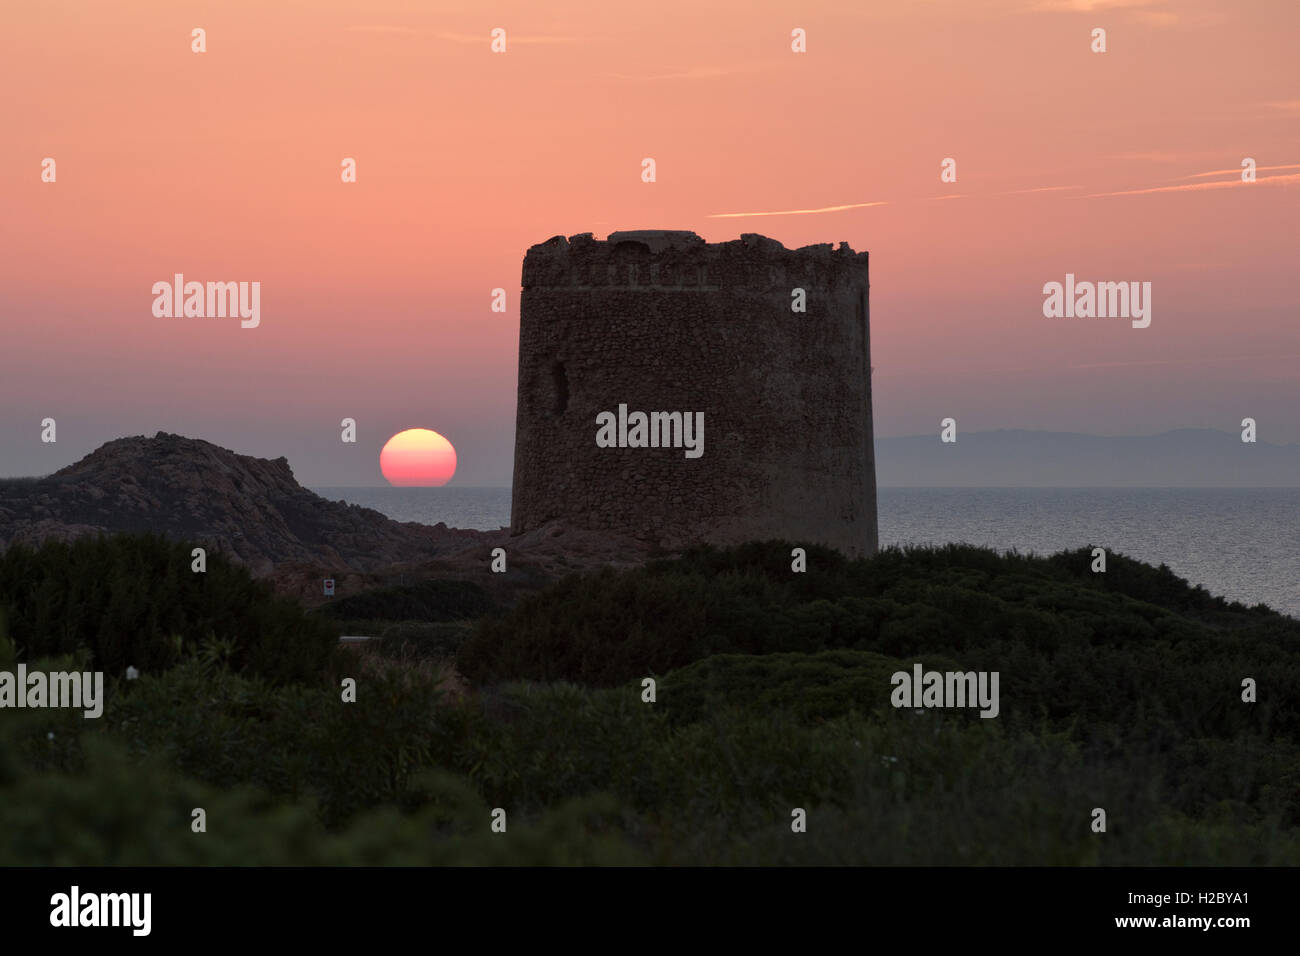 La Torre Spagnola, the Spanish Tower, in Isola Rossa Sardinia with the sun setting behind, September Stock Photo